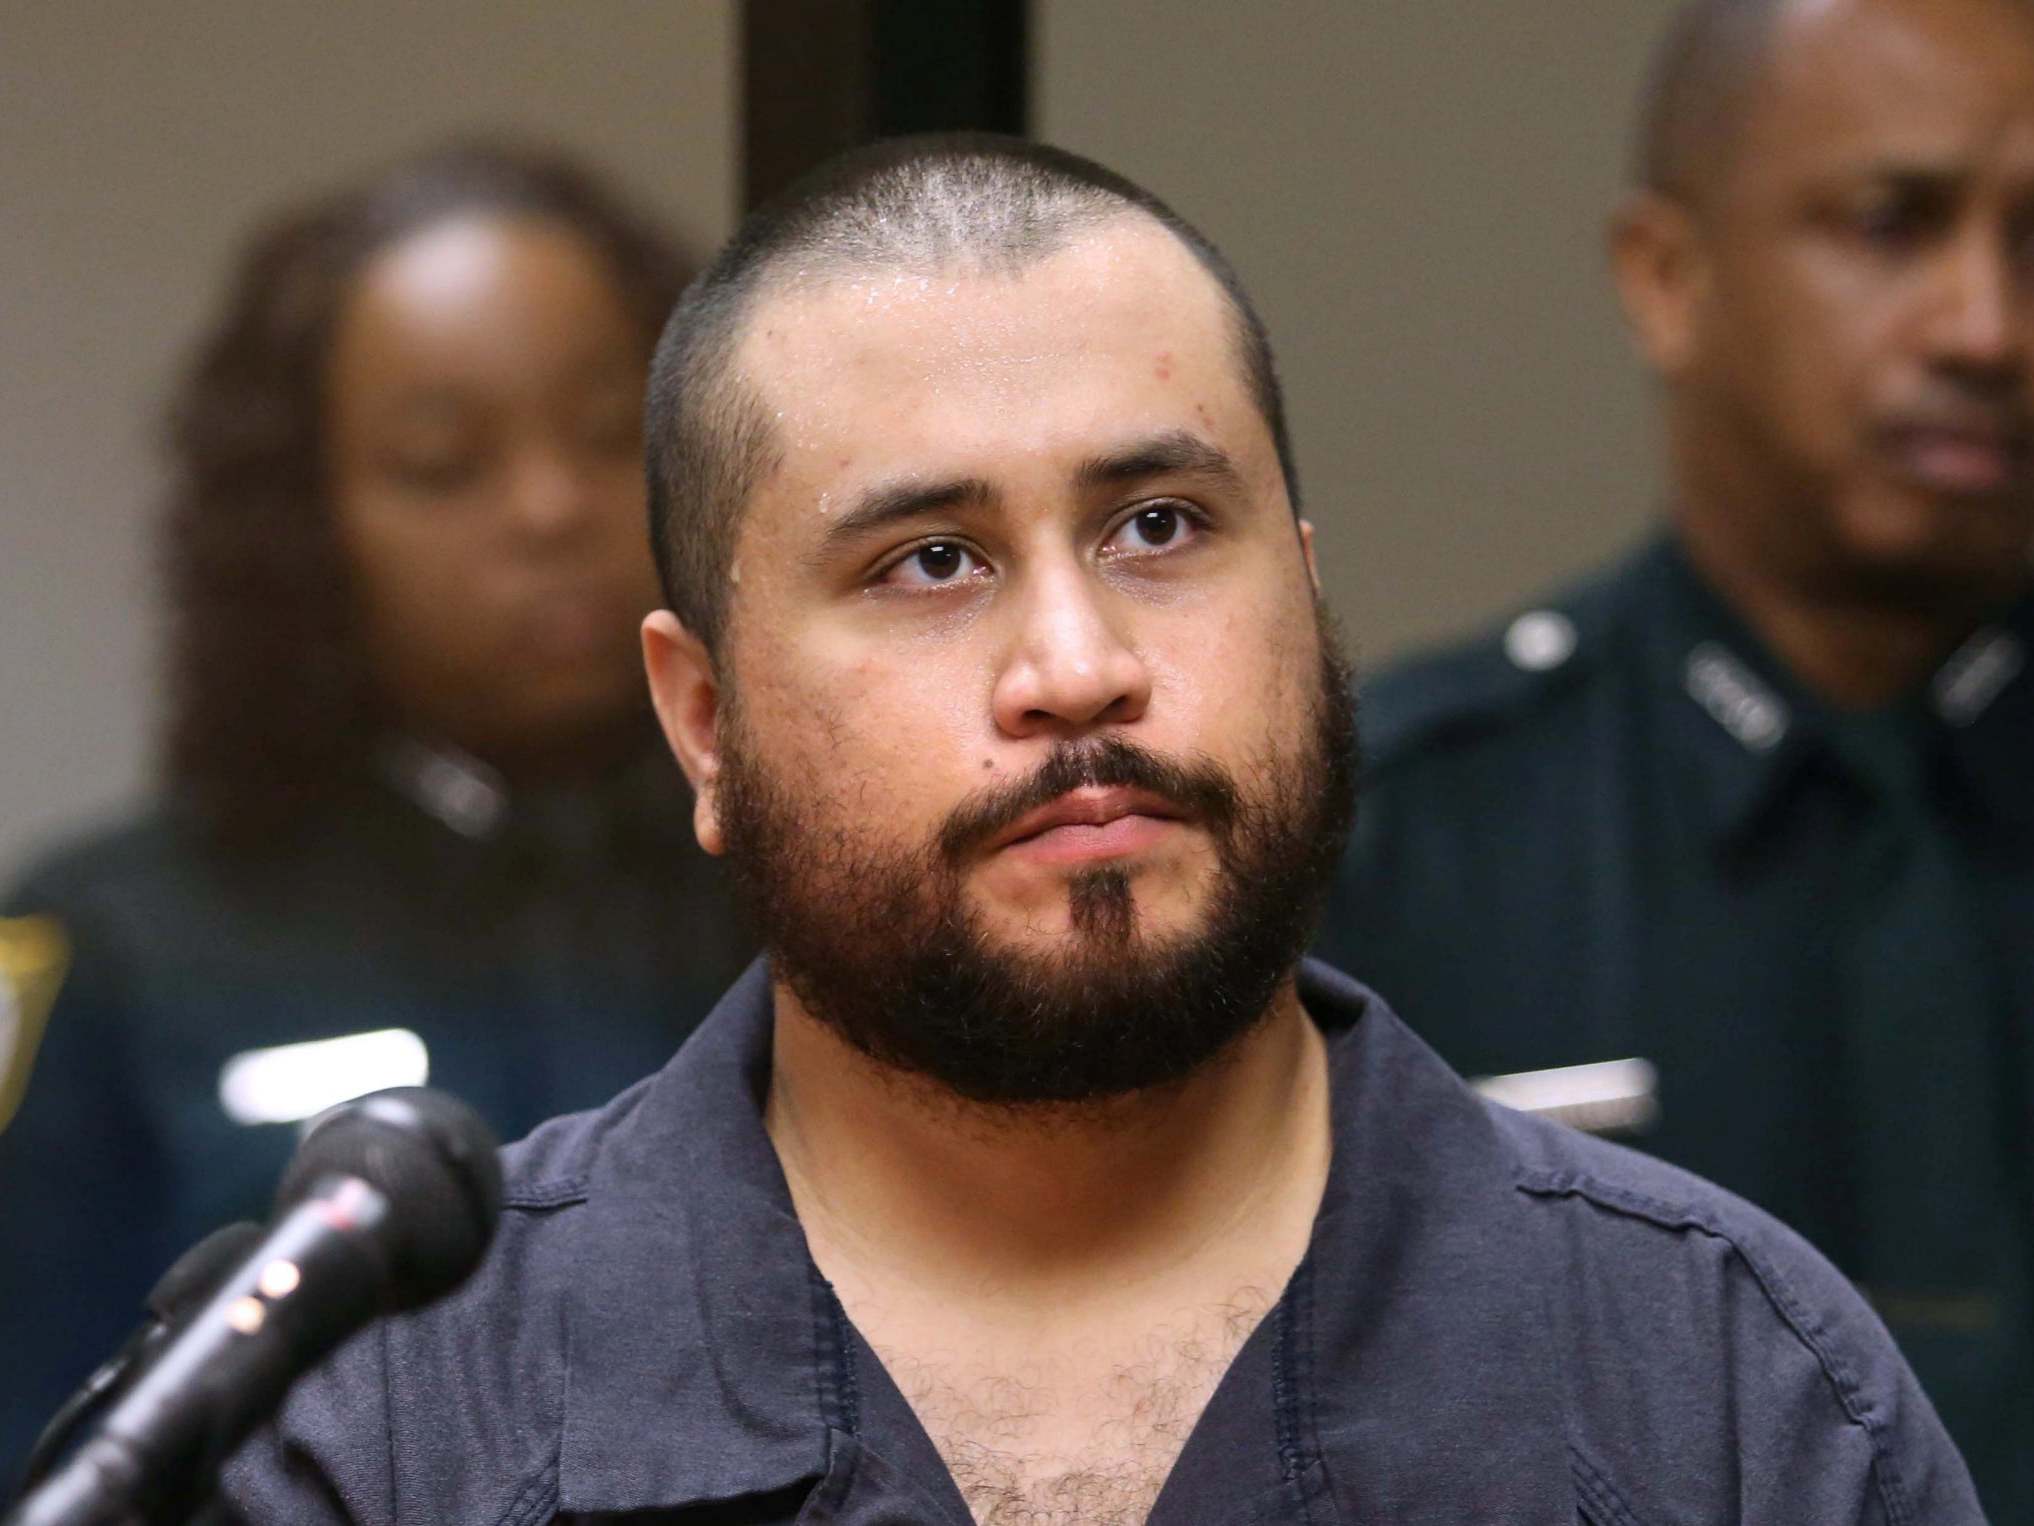 George Zimmerman claims his reputation was destroyed as a result of the trial